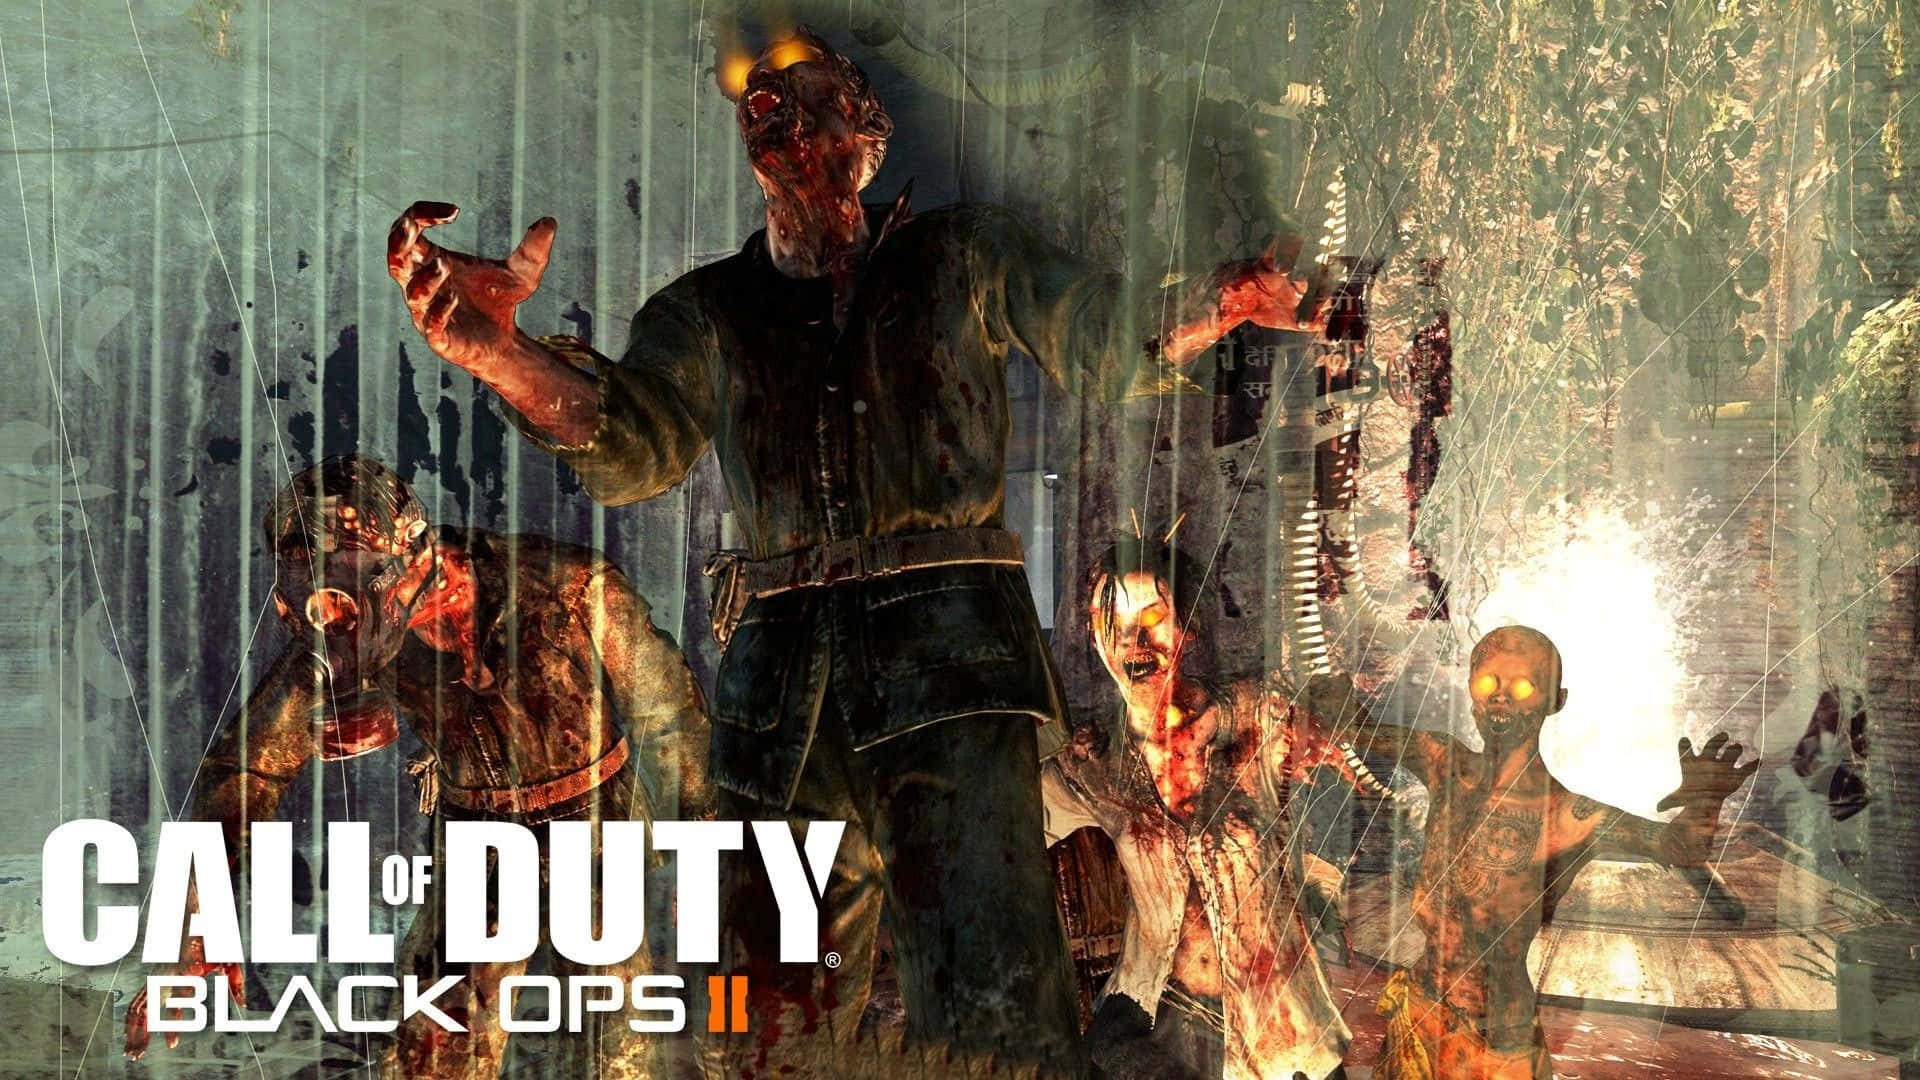 Ready for a thrilling game of Call of Duty Black Ops 2? Wallpaper